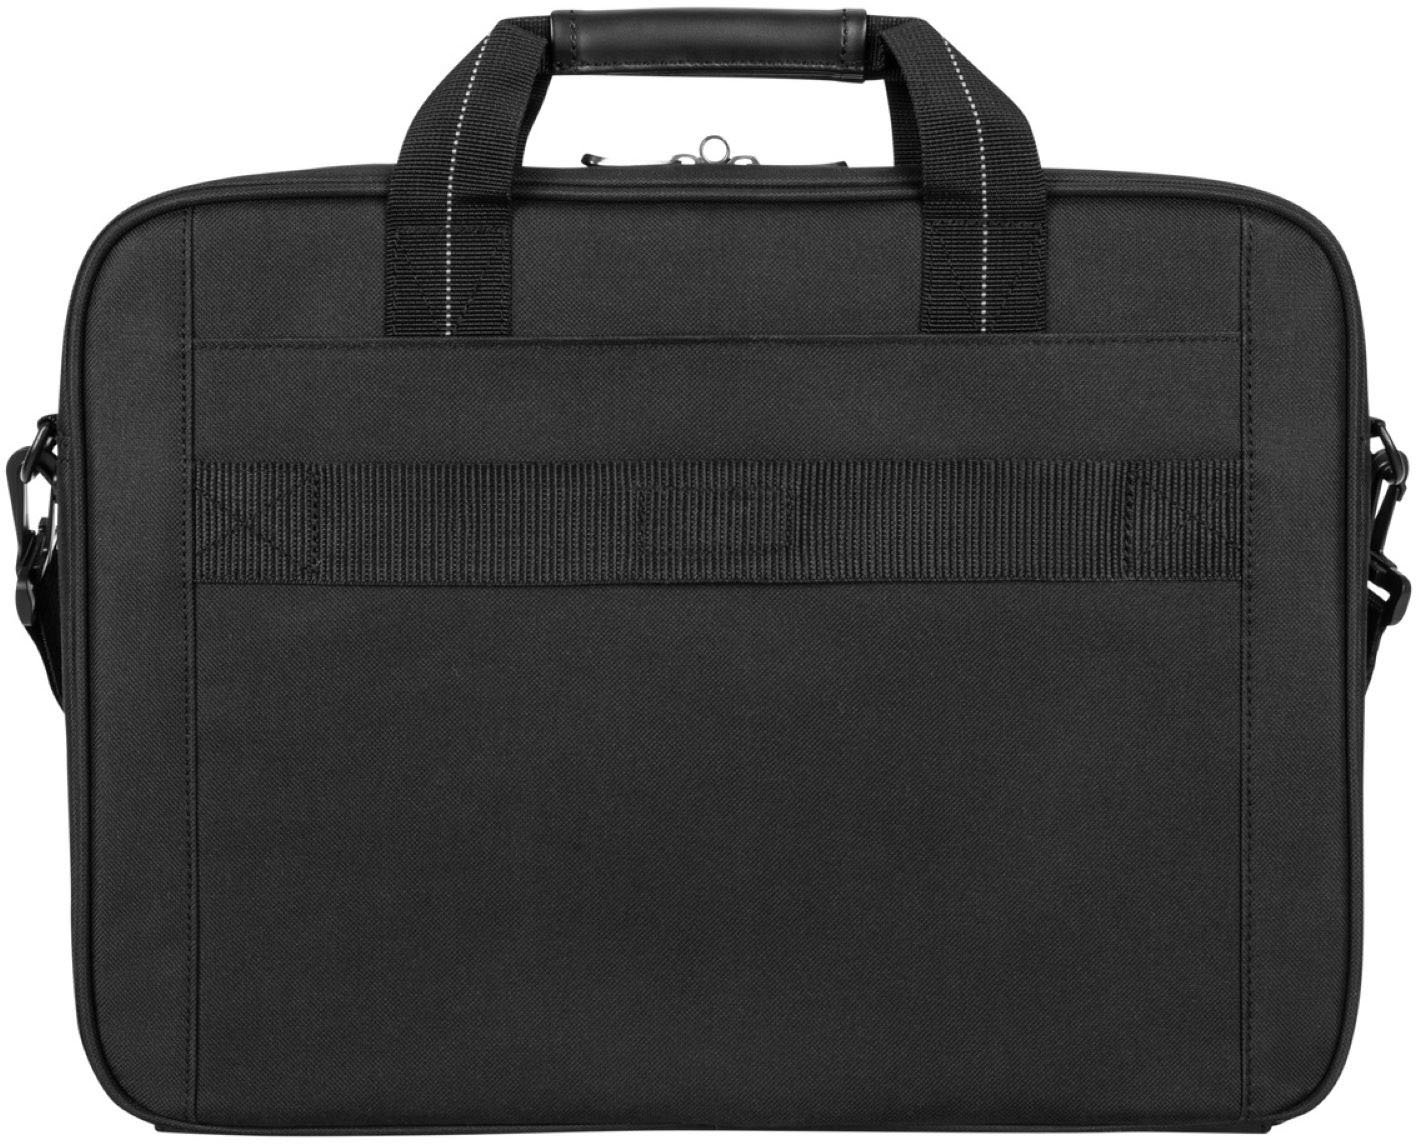 Back View: Targus - Classic Slim Briefcase for 15.6 Laptops - Black